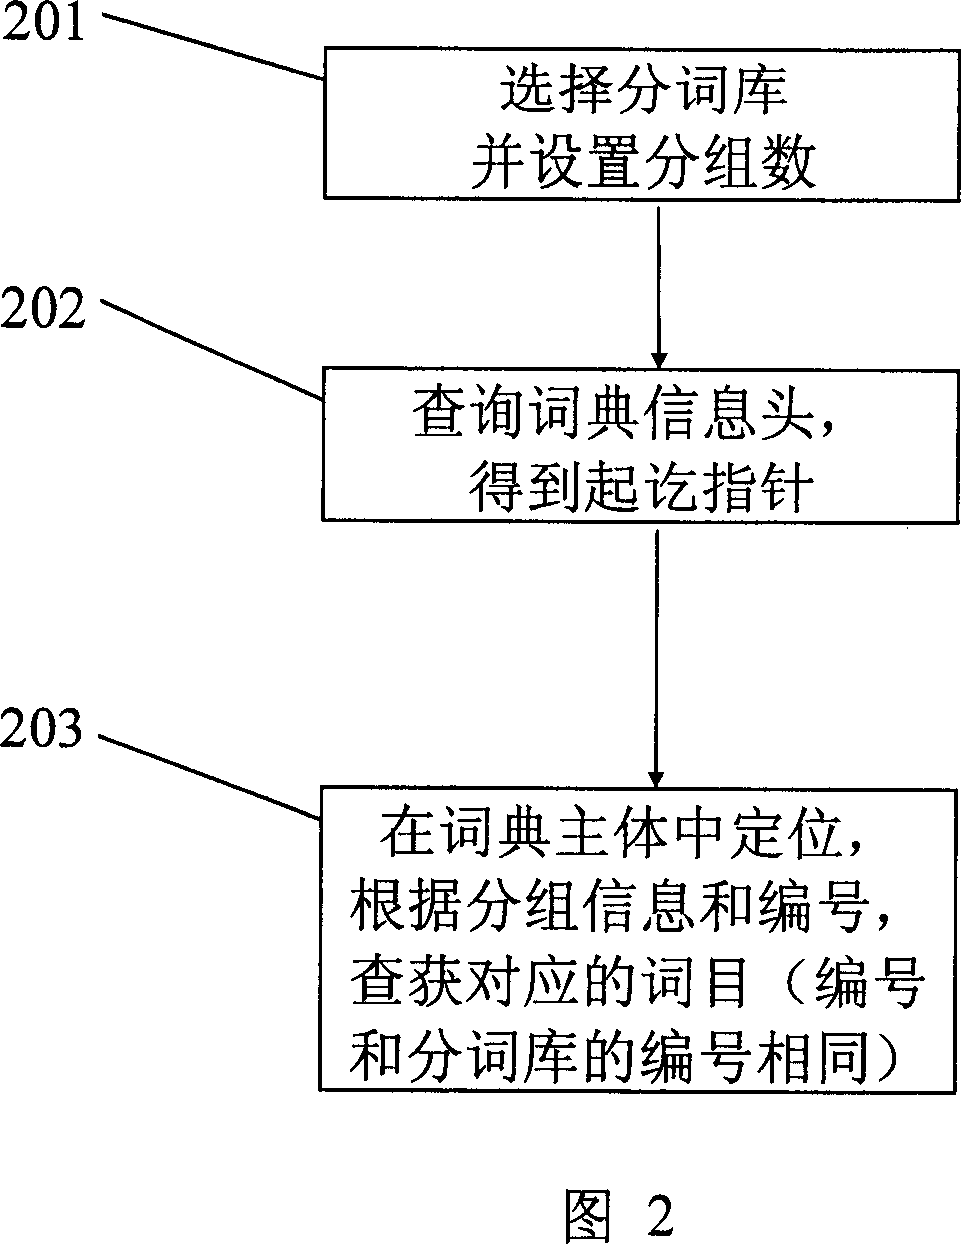 Method for bidirectional translation of terms and group memory of work using single thesaurus